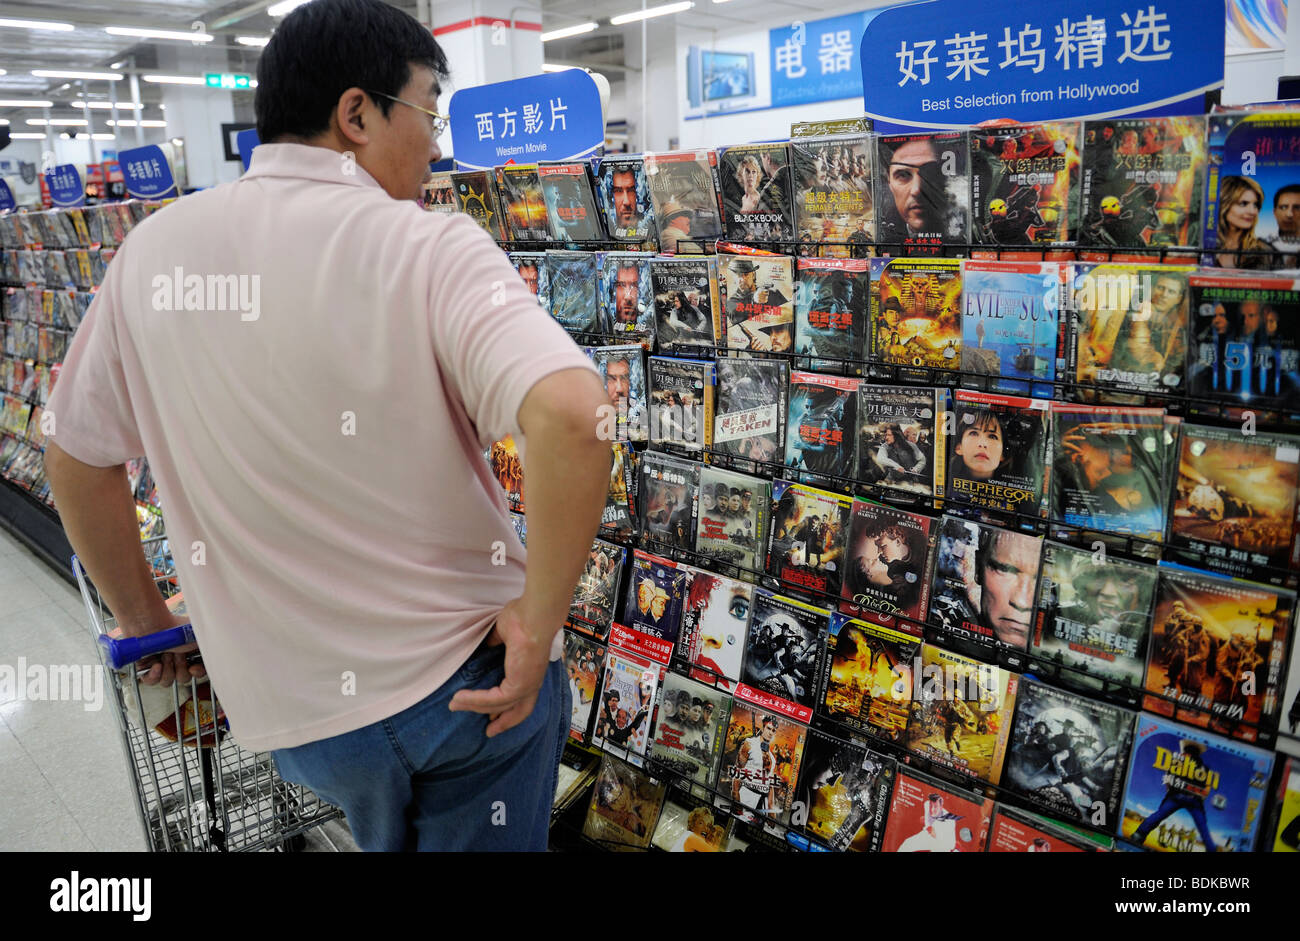 DVD are on sale in a Wal-Mart supercenter in Beijing, China. 2009 Stock Photo